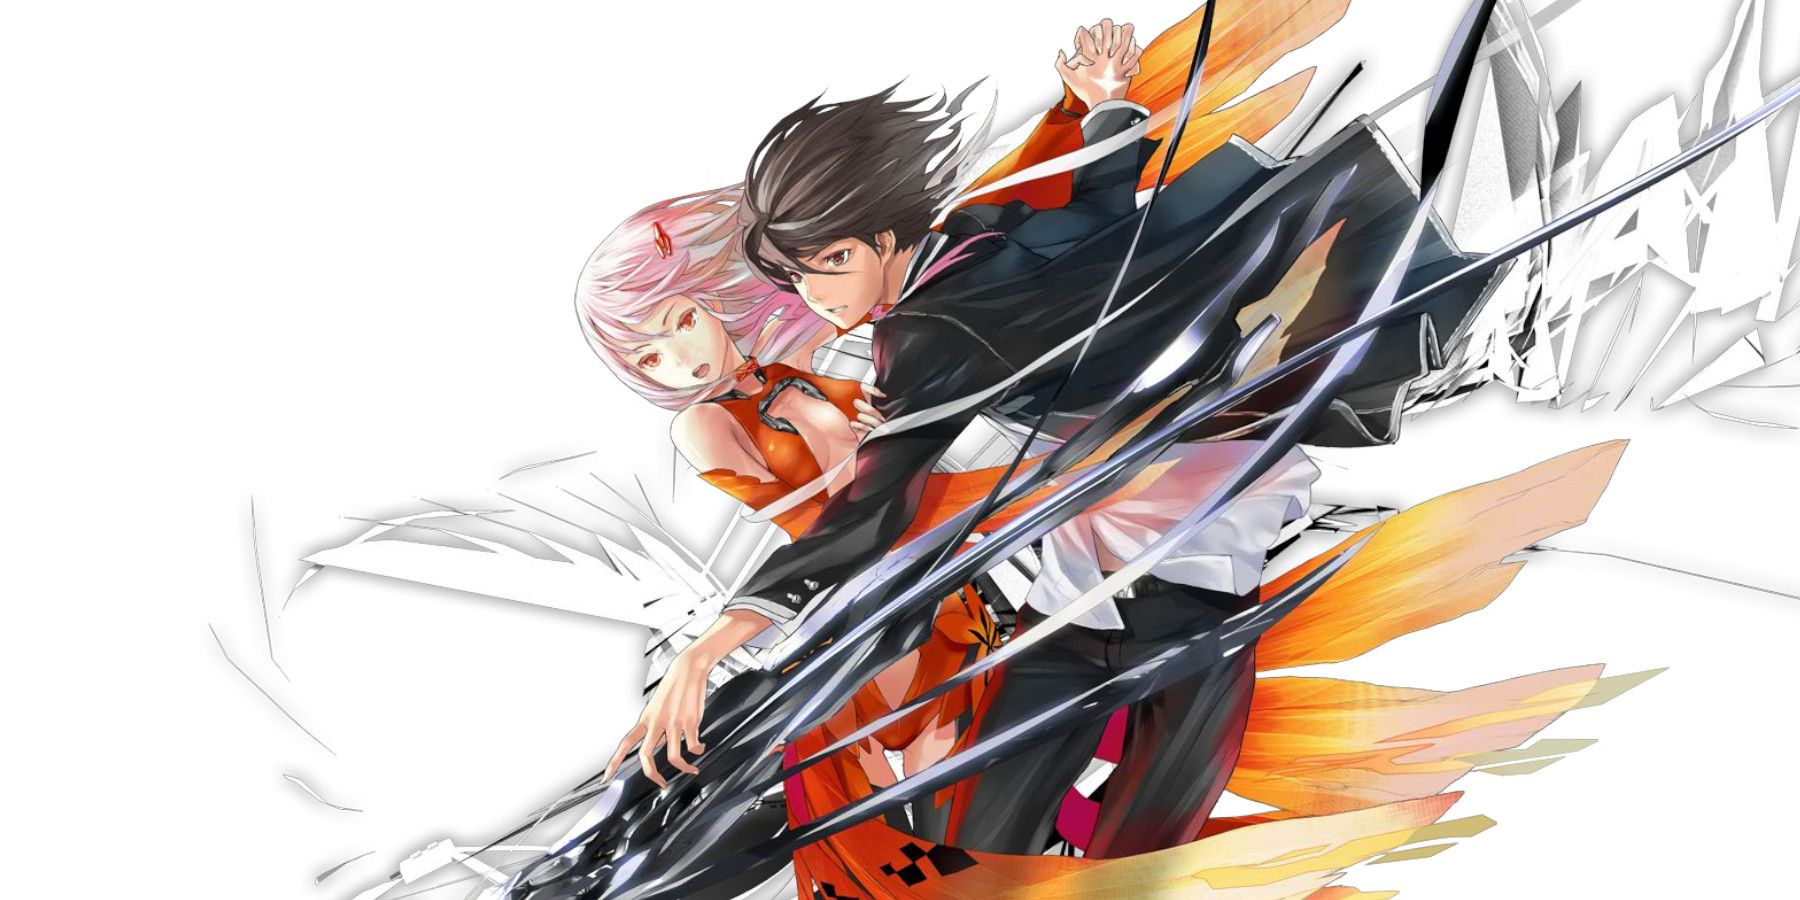 Guilty Crown (TV) - Anime News Network